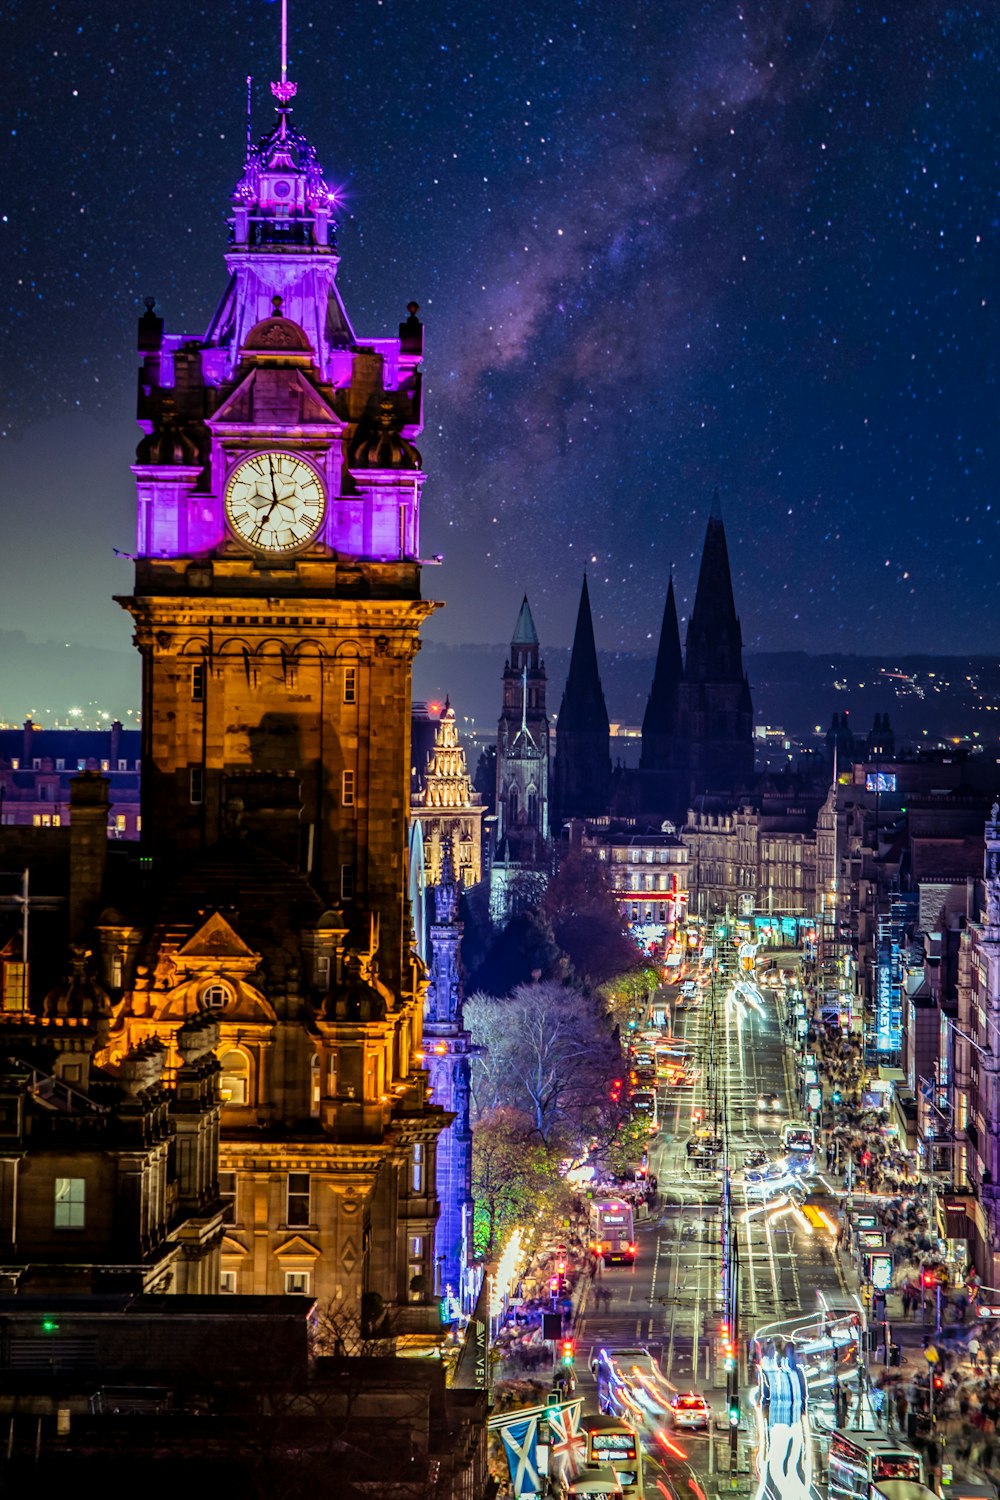 a clock tower in the middle of a city at night